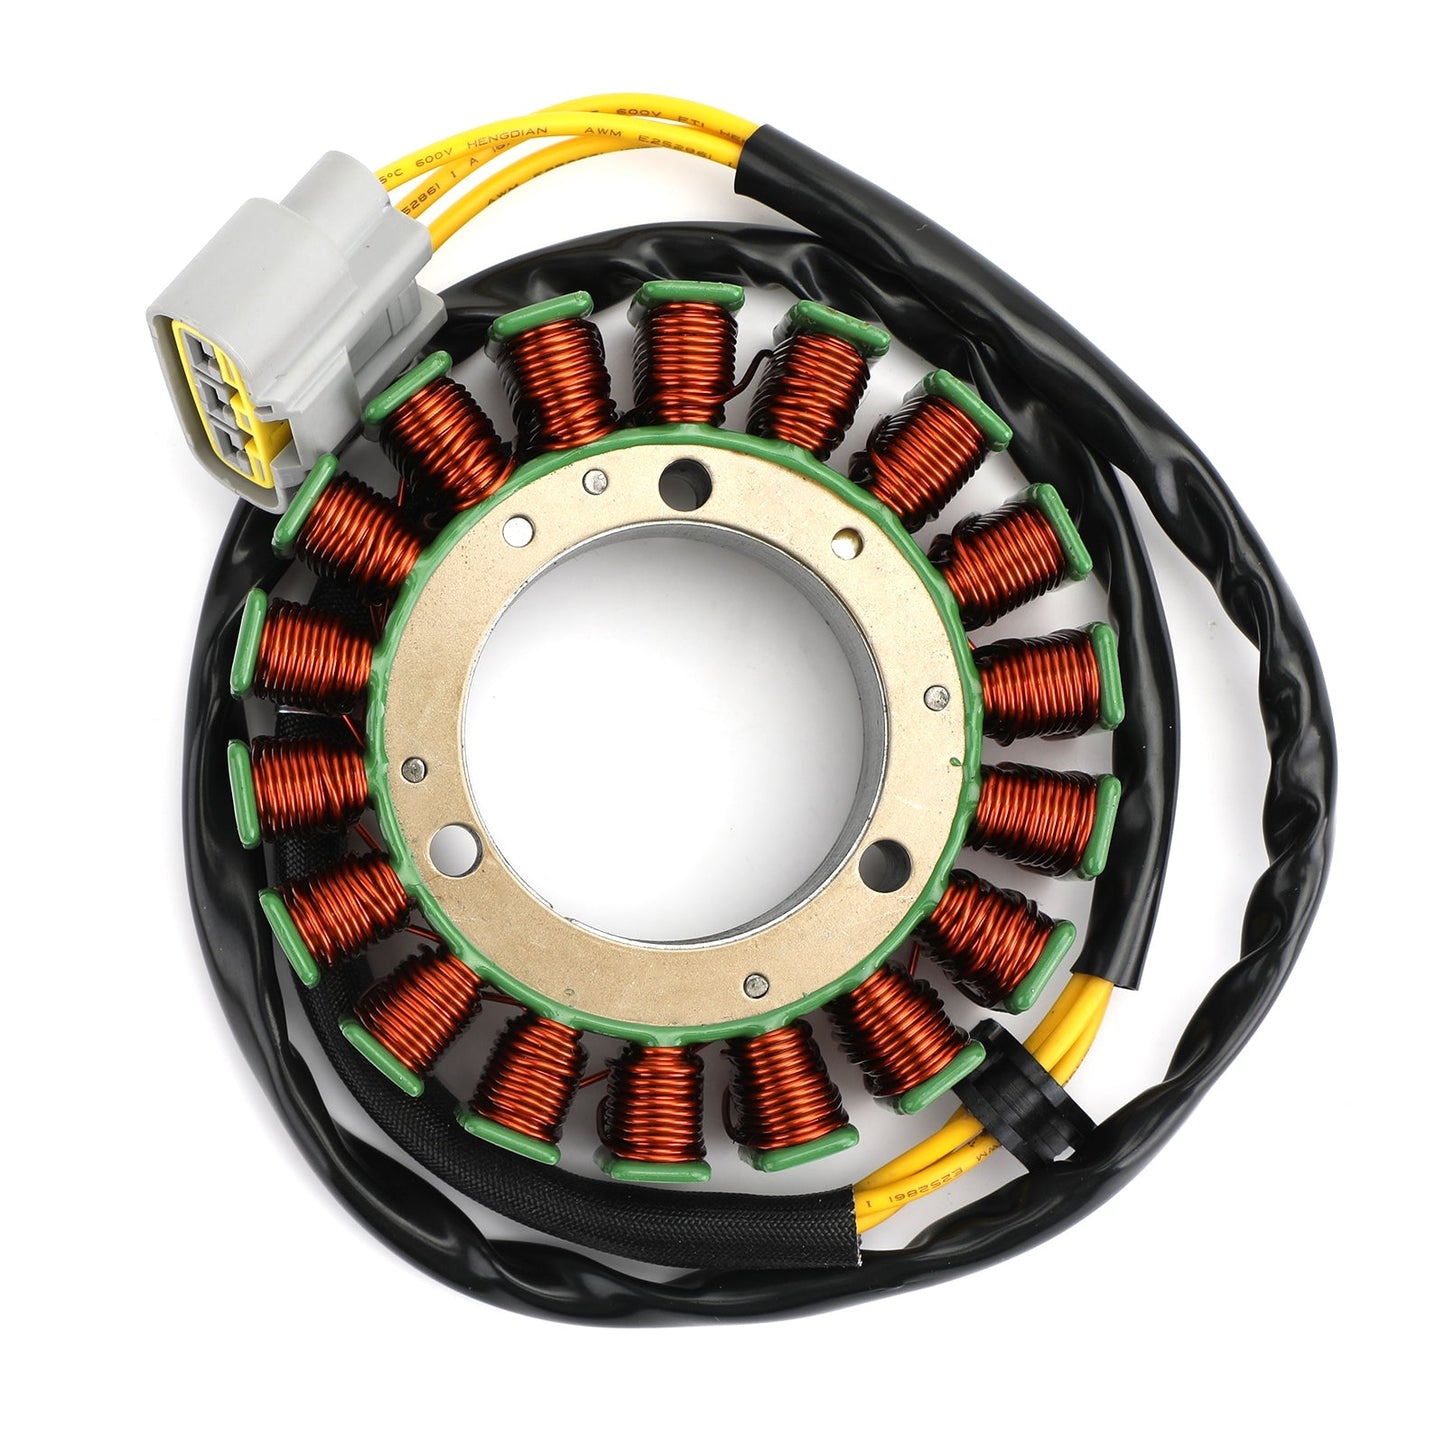 Stator Generator for Can-Am Spyder GS RS RS-S Roadster 990 2008-2013 # 420685502